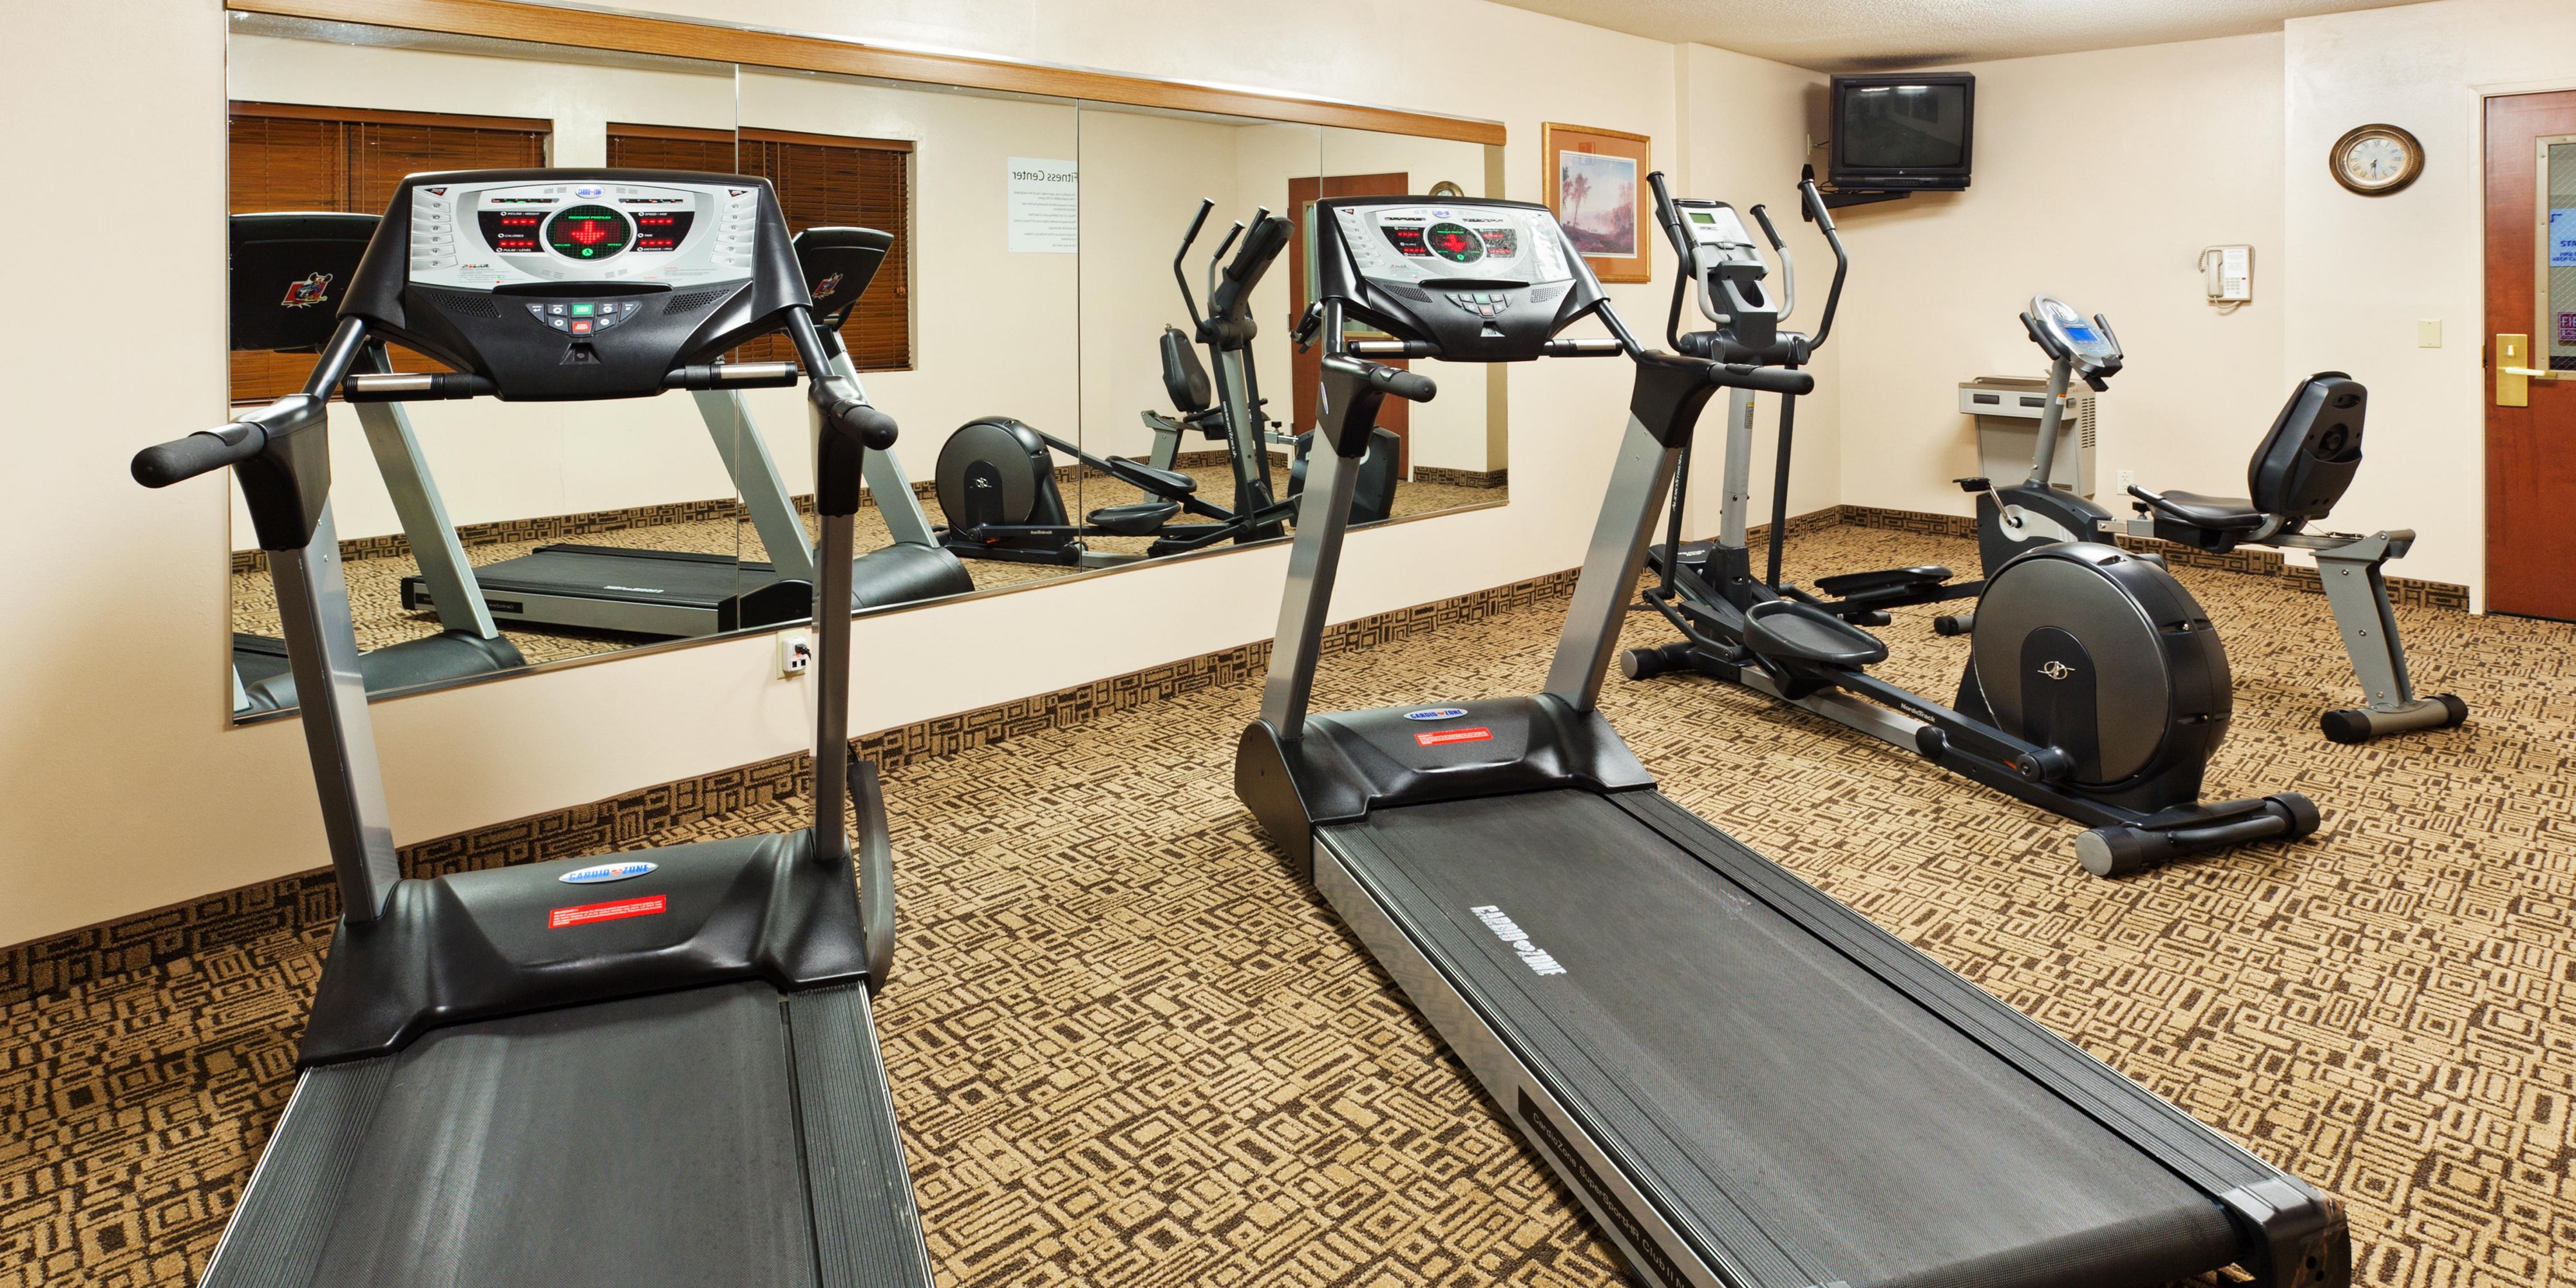 Our complimentary Fitness Center makes it easy for you to work out, have fun, and stay fit.